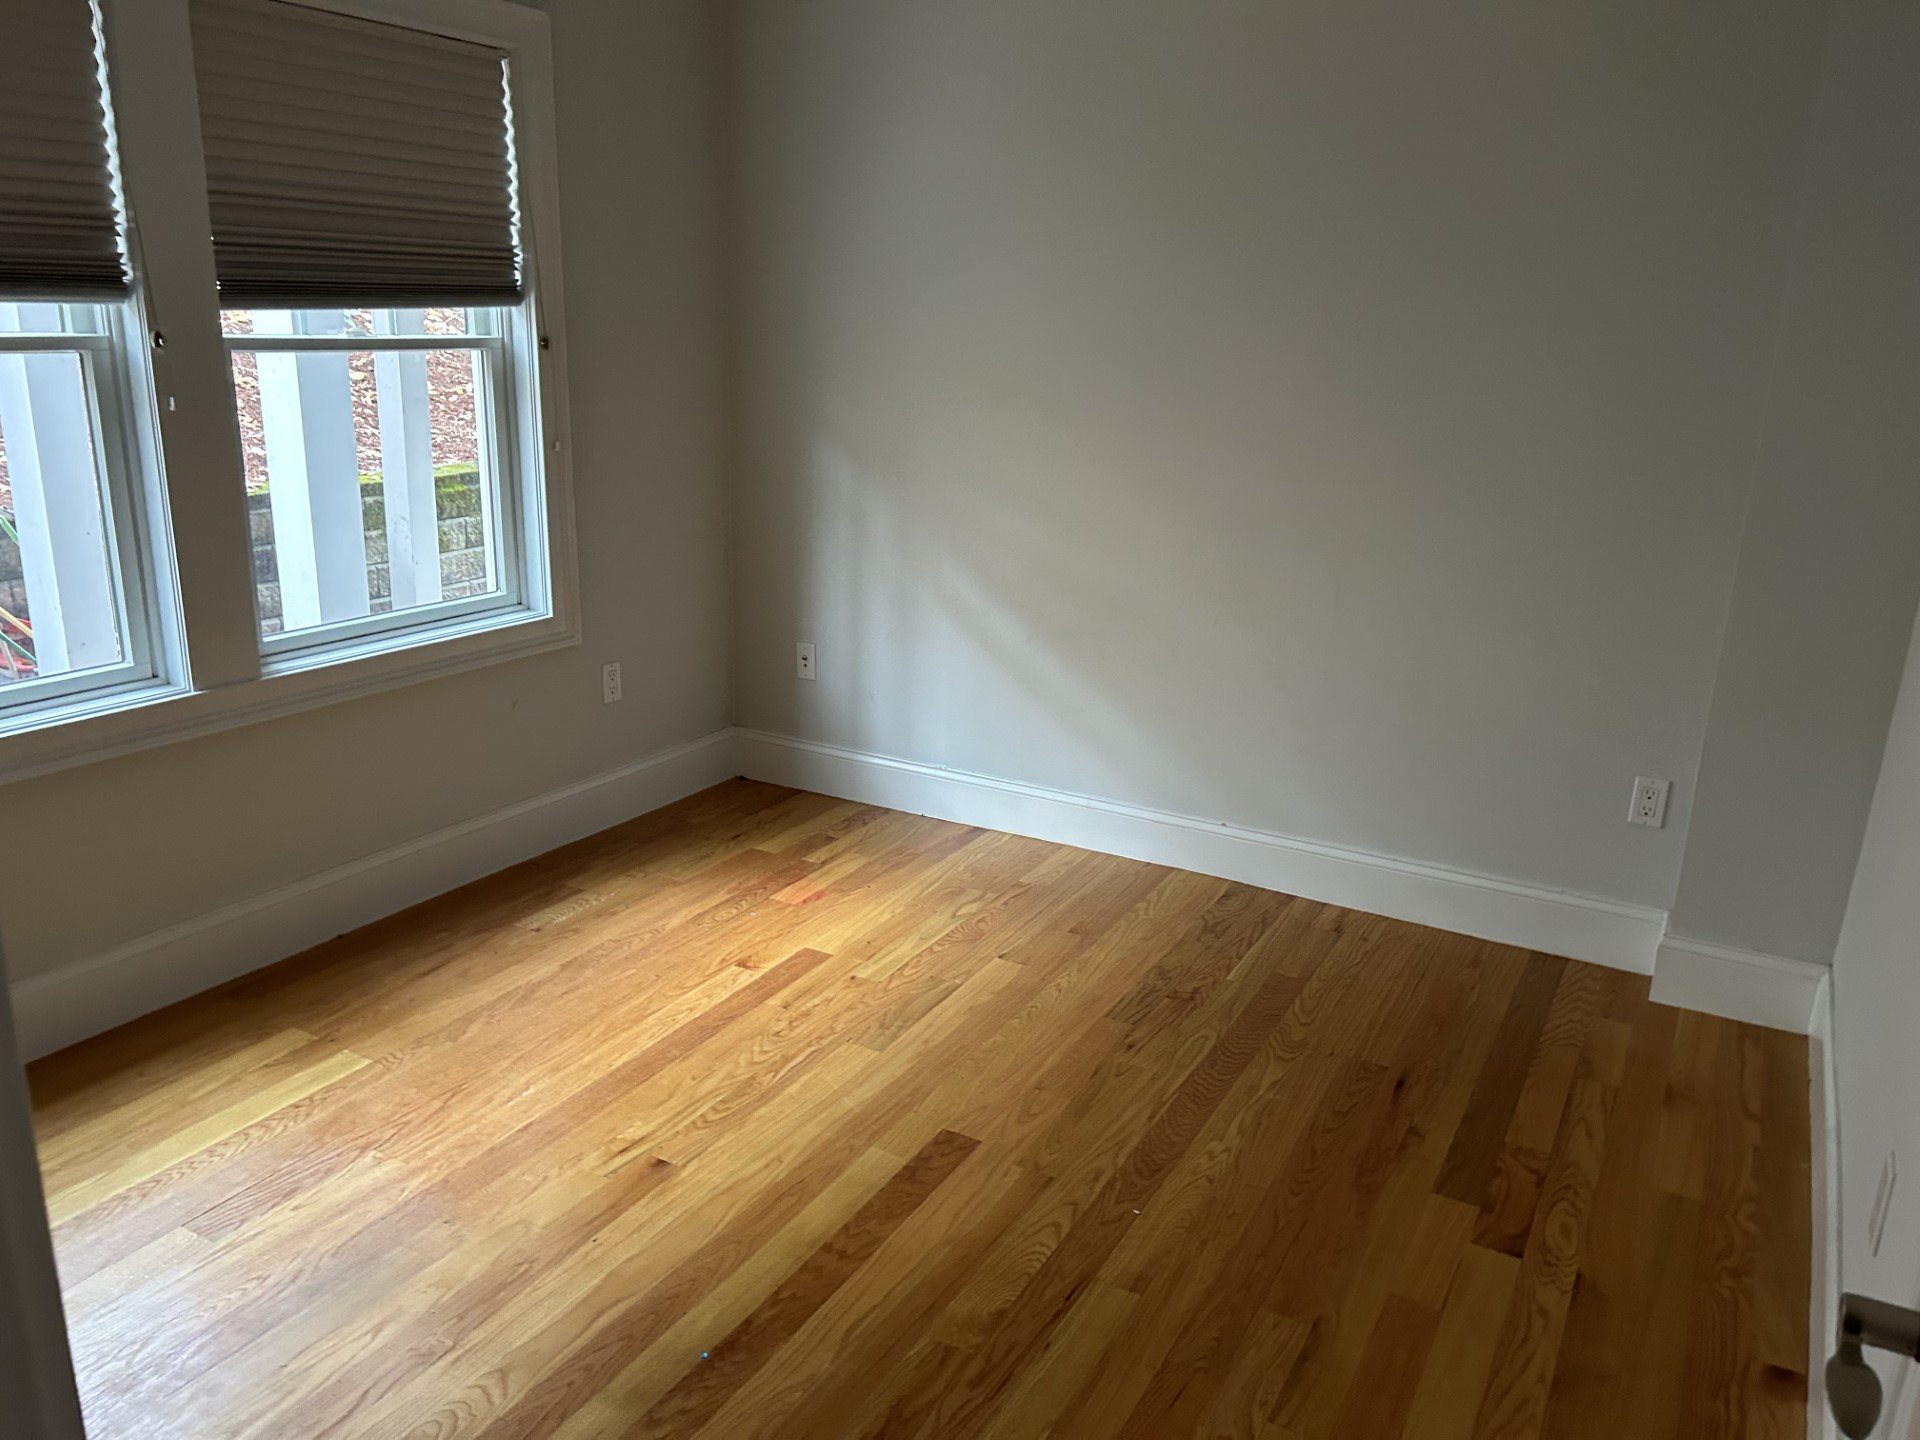 Photos of apartment on Beaconsfield Rd.,Brookline MA 02445